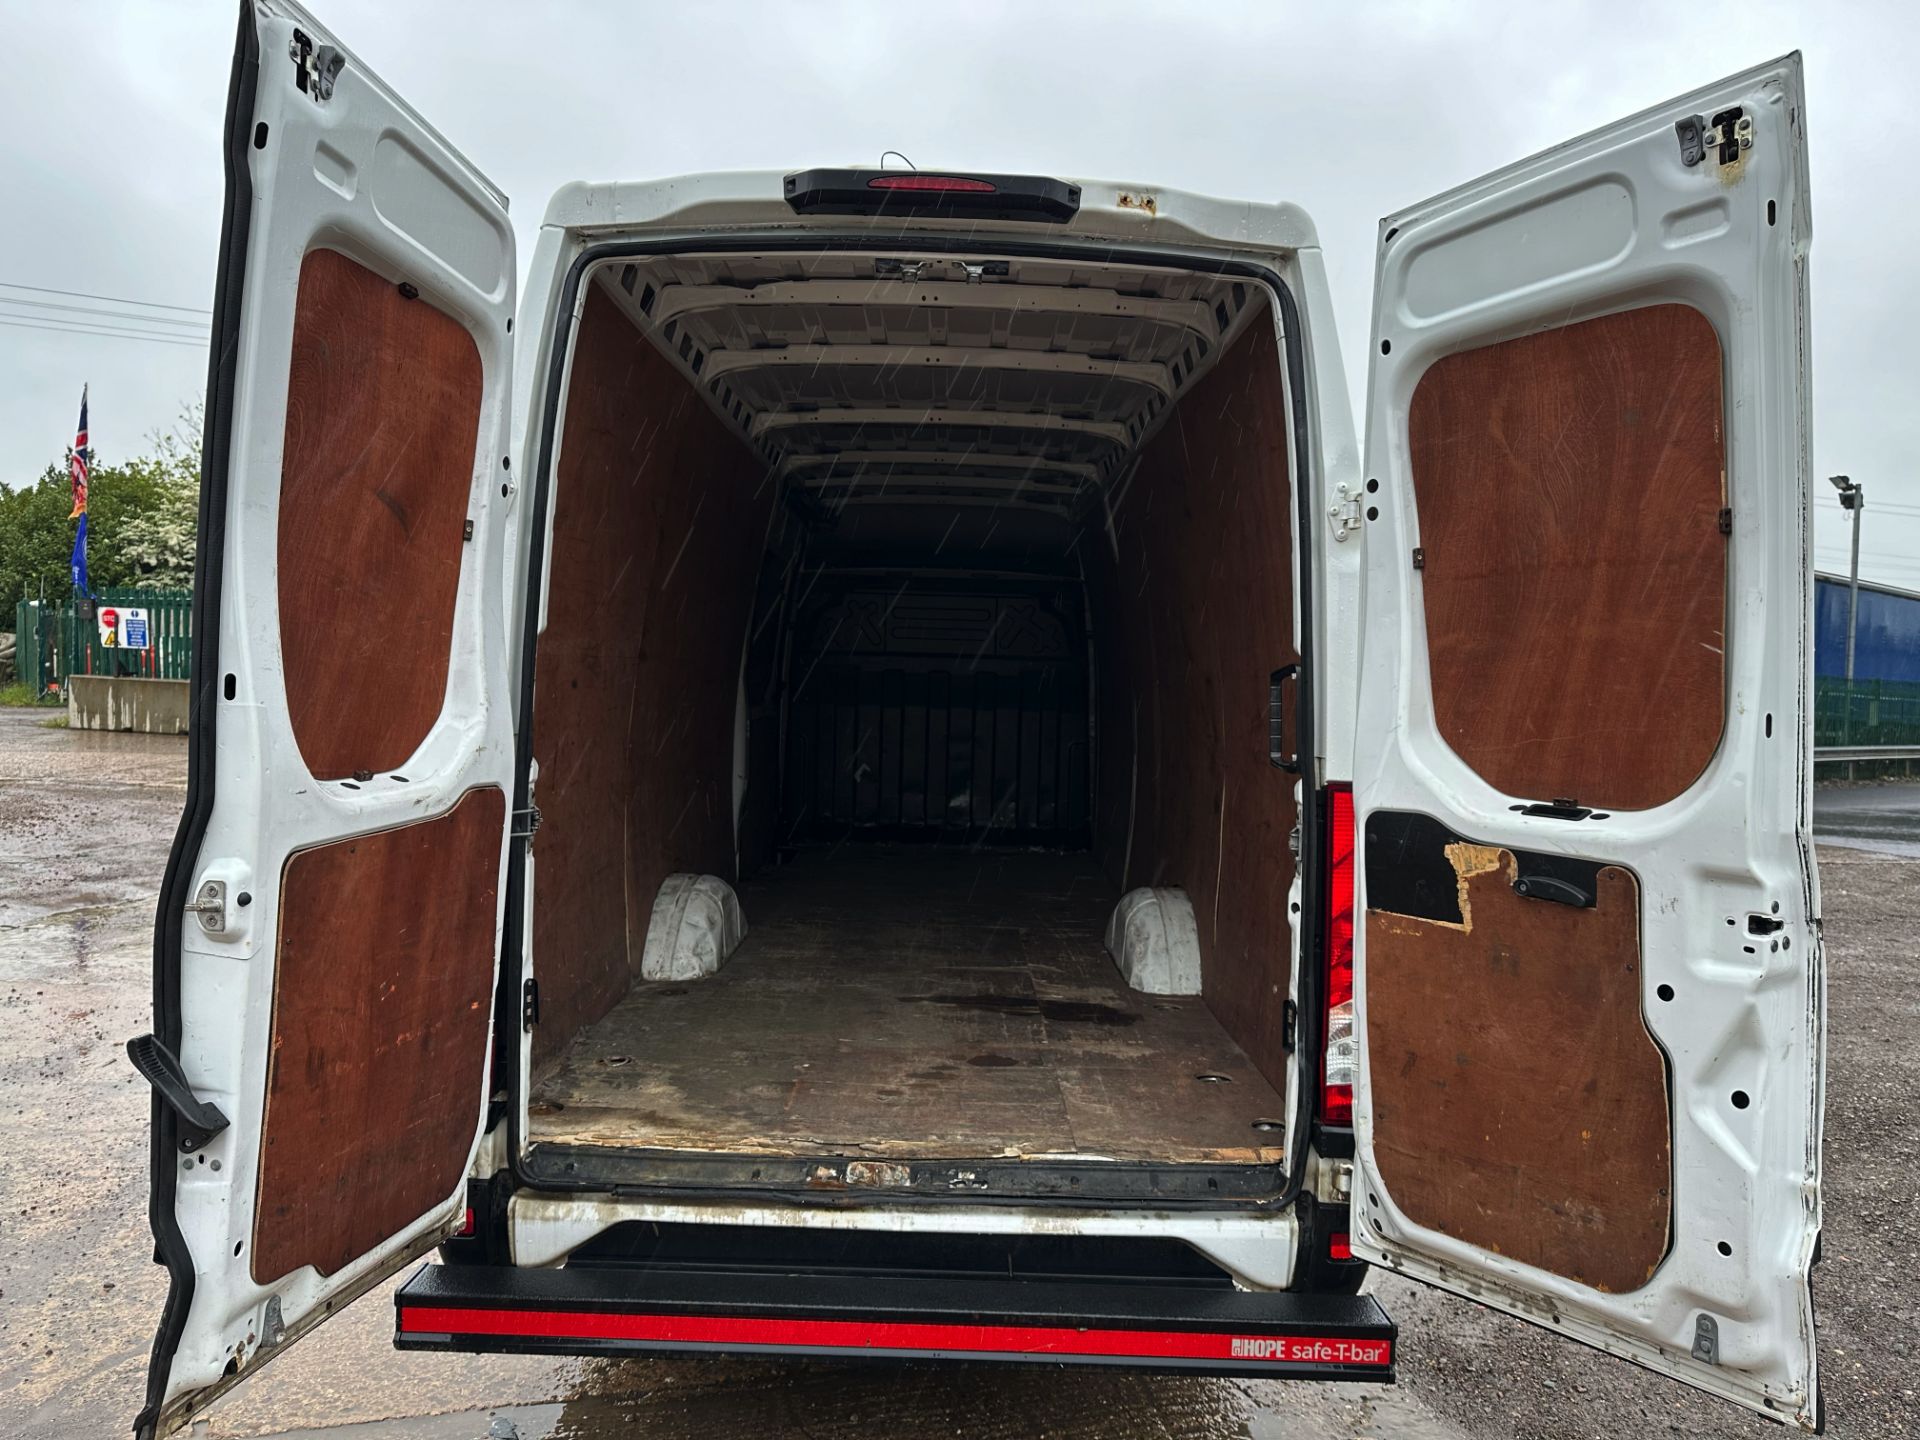 Iveco Daily 35-140 Long Wheel Base High Roof - 2021 Reg (New Shape) Only 85K Miles - Air Con - Look! - Image 11 of 27